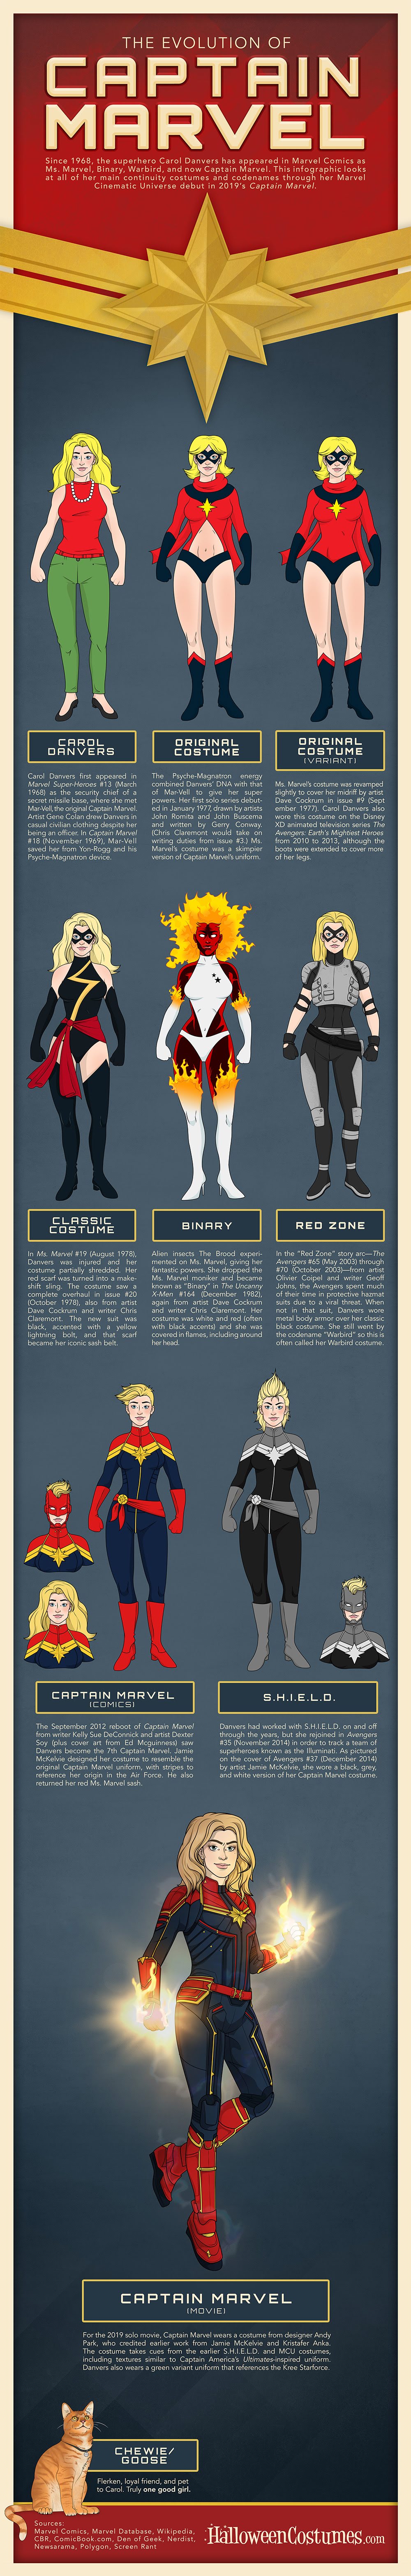 The Evolution Of Captain Marvel #infographic